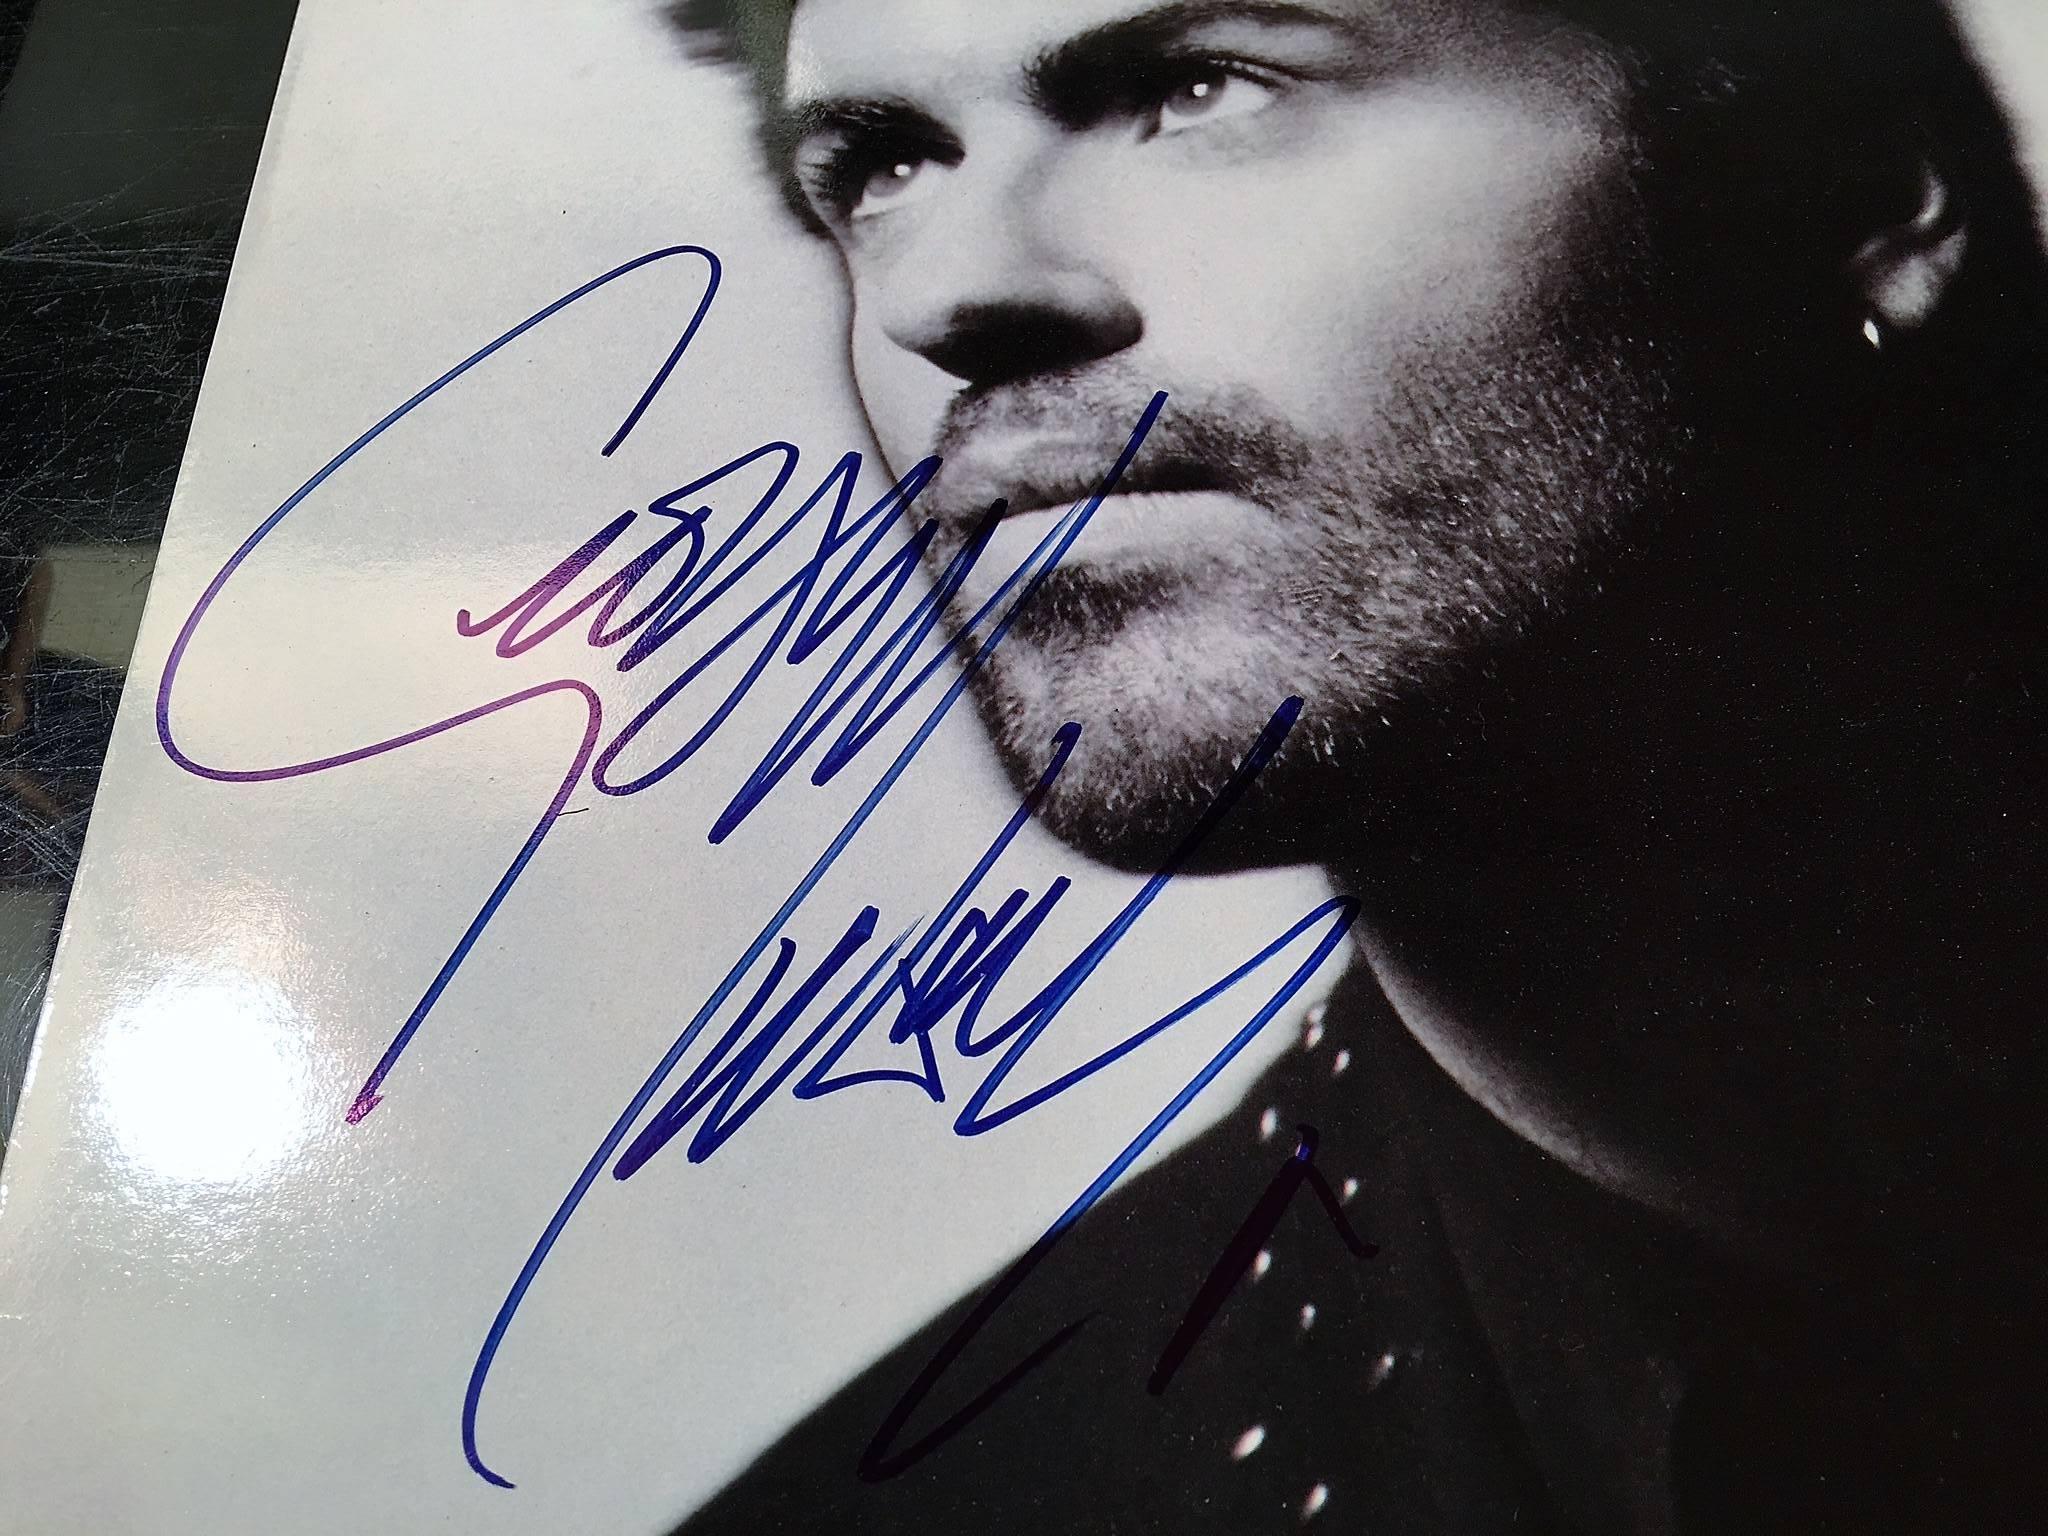 'Heal The Pain' an George Michael album released in Denmark .Autographed in 1995 obtained by the seller in Person. “Certificate of Authenticity” accompanies this album cover. There is no vinyl record with this.